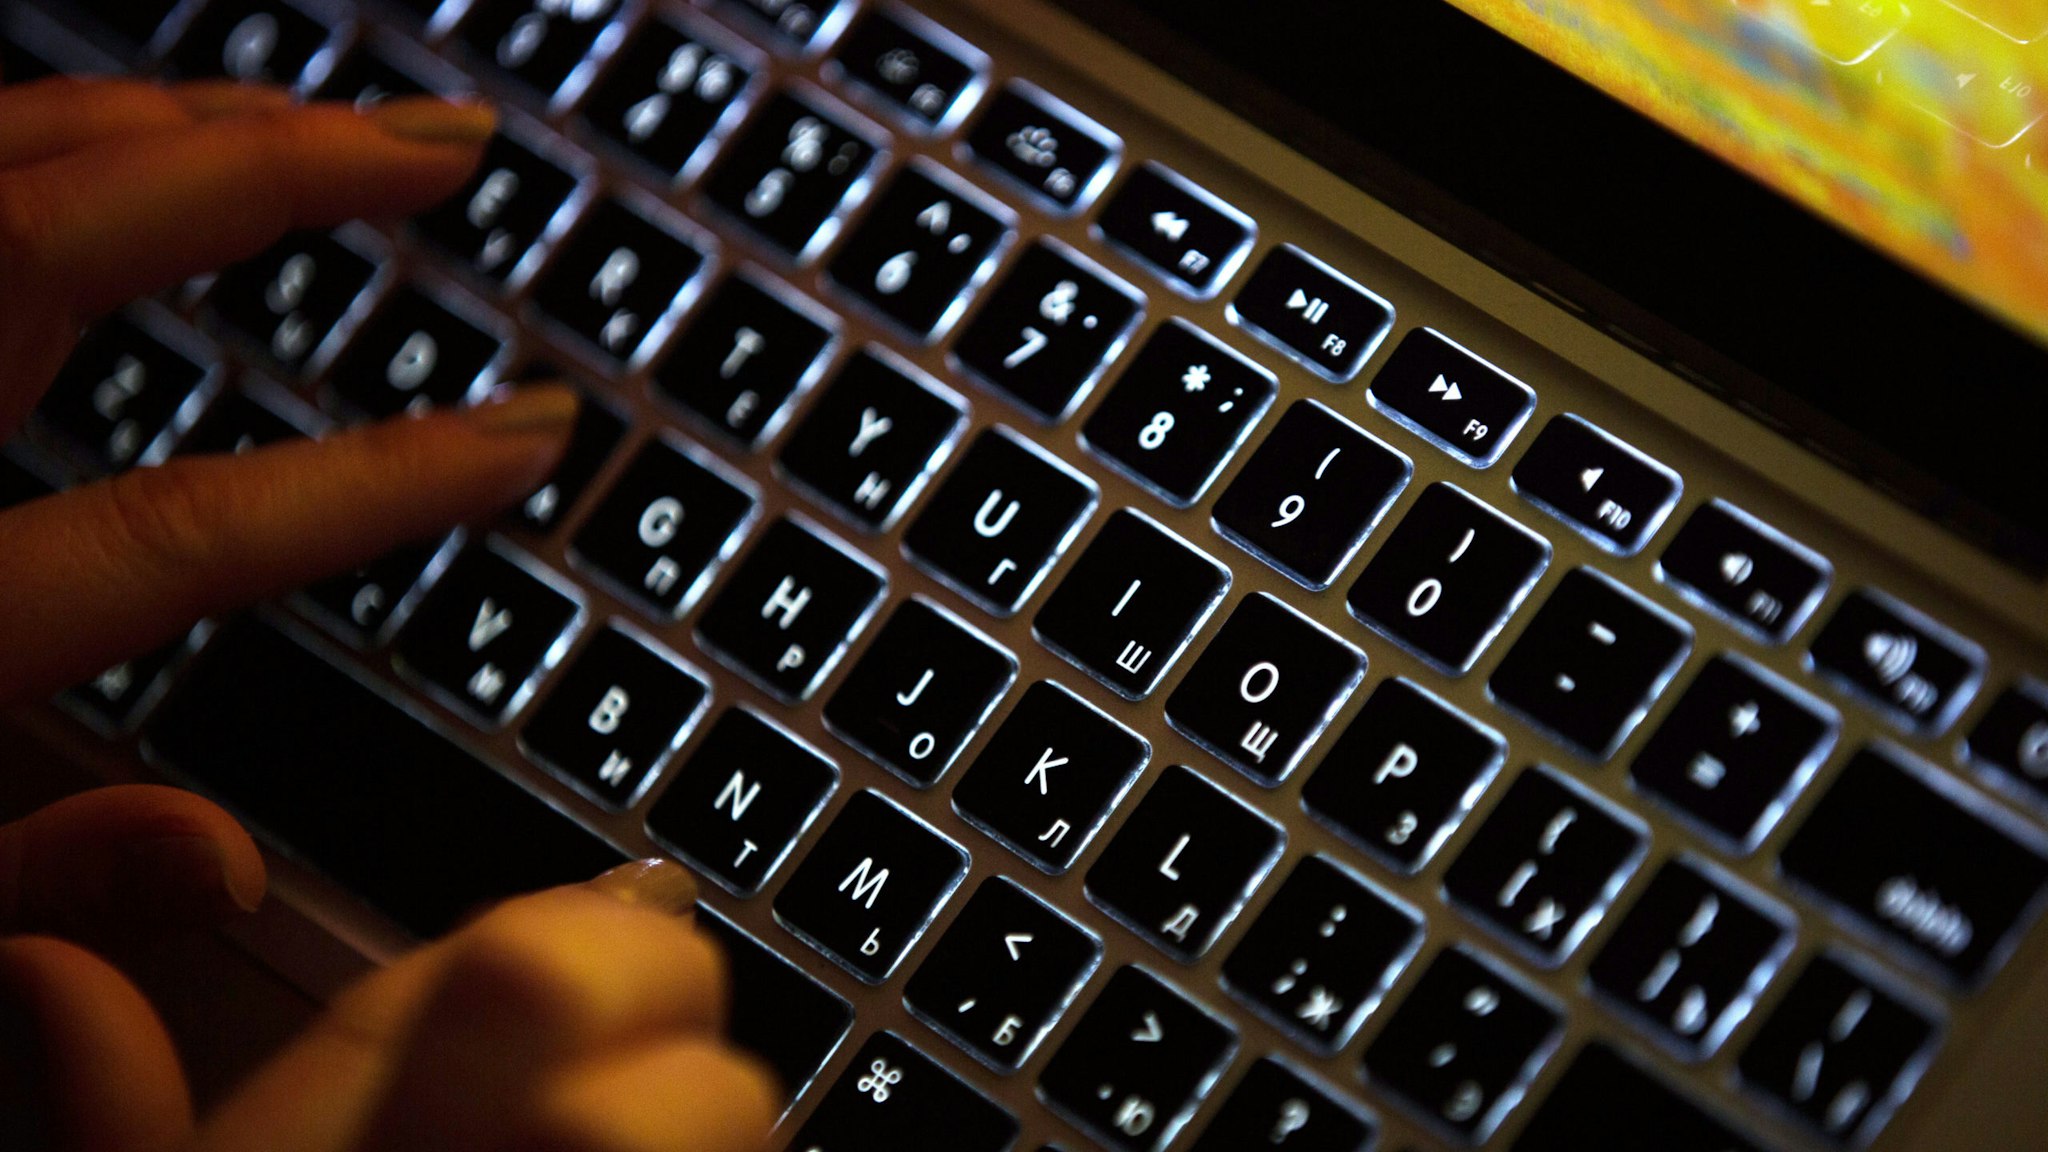 A person uses a laptop computer with illuminated English and Russian Cyrillic character keys in this arranged photograph in Moscow, Russia, on Thursday, March 14, 2019. Russian internet trolls appear to be shifting strategy in their efforts to disrupt the 2020 U.S. elections, promoting politically divisive messages through phony social media accounts instead of creating propaganda themselves, cybersecurity experts say. Photographer: Andrey Rudakov/Bloomberg via Getty Images